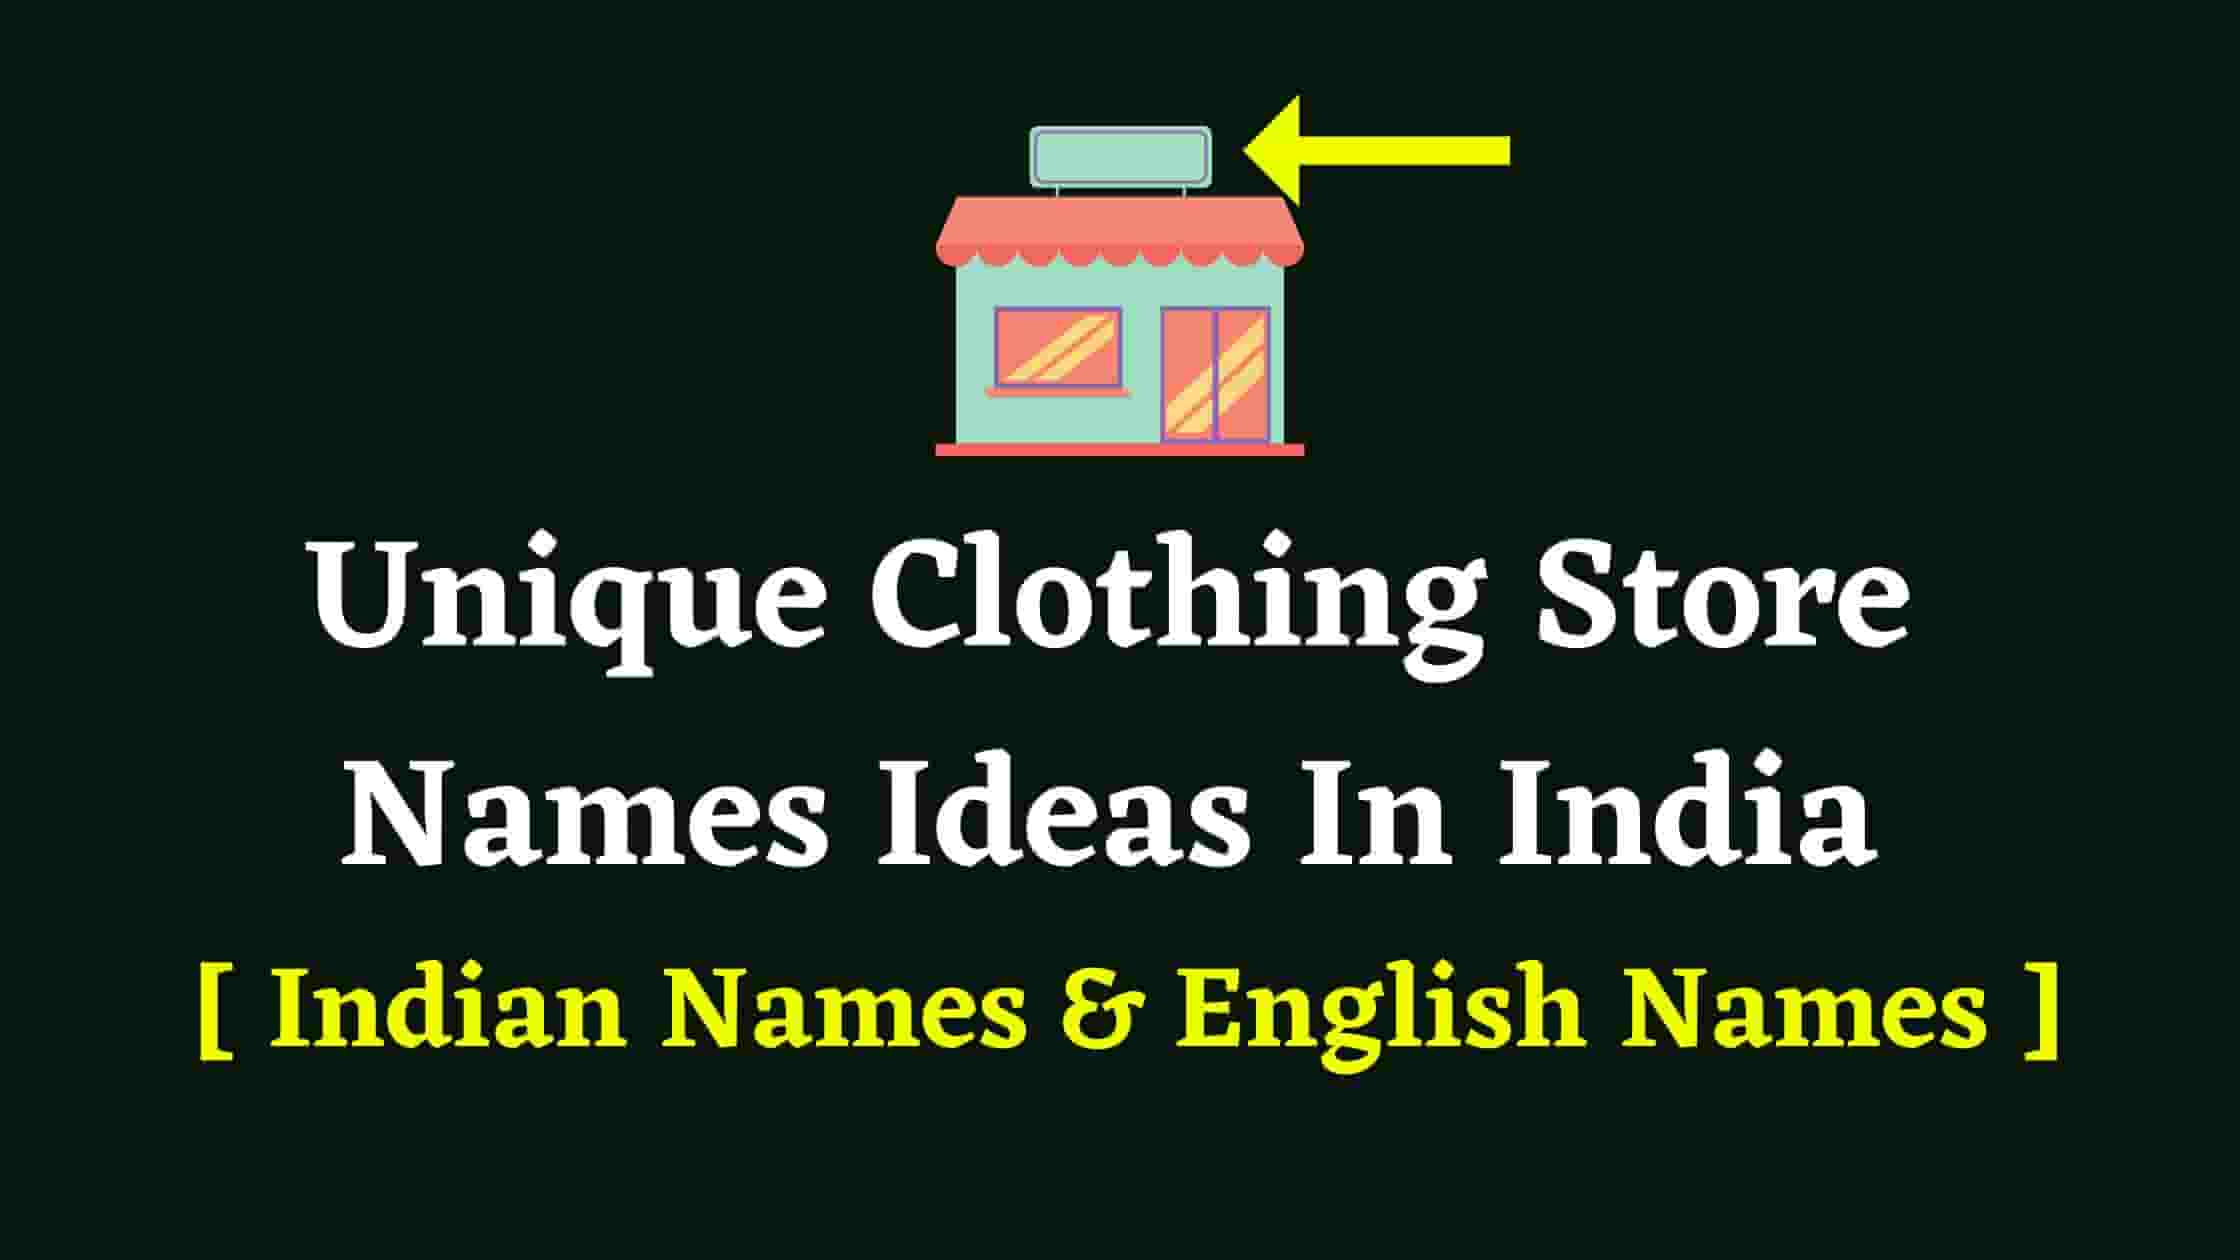 184 Garments Shop Names Ideas In India  184 Clothing Store Names Ideas In  India - Big Mastery